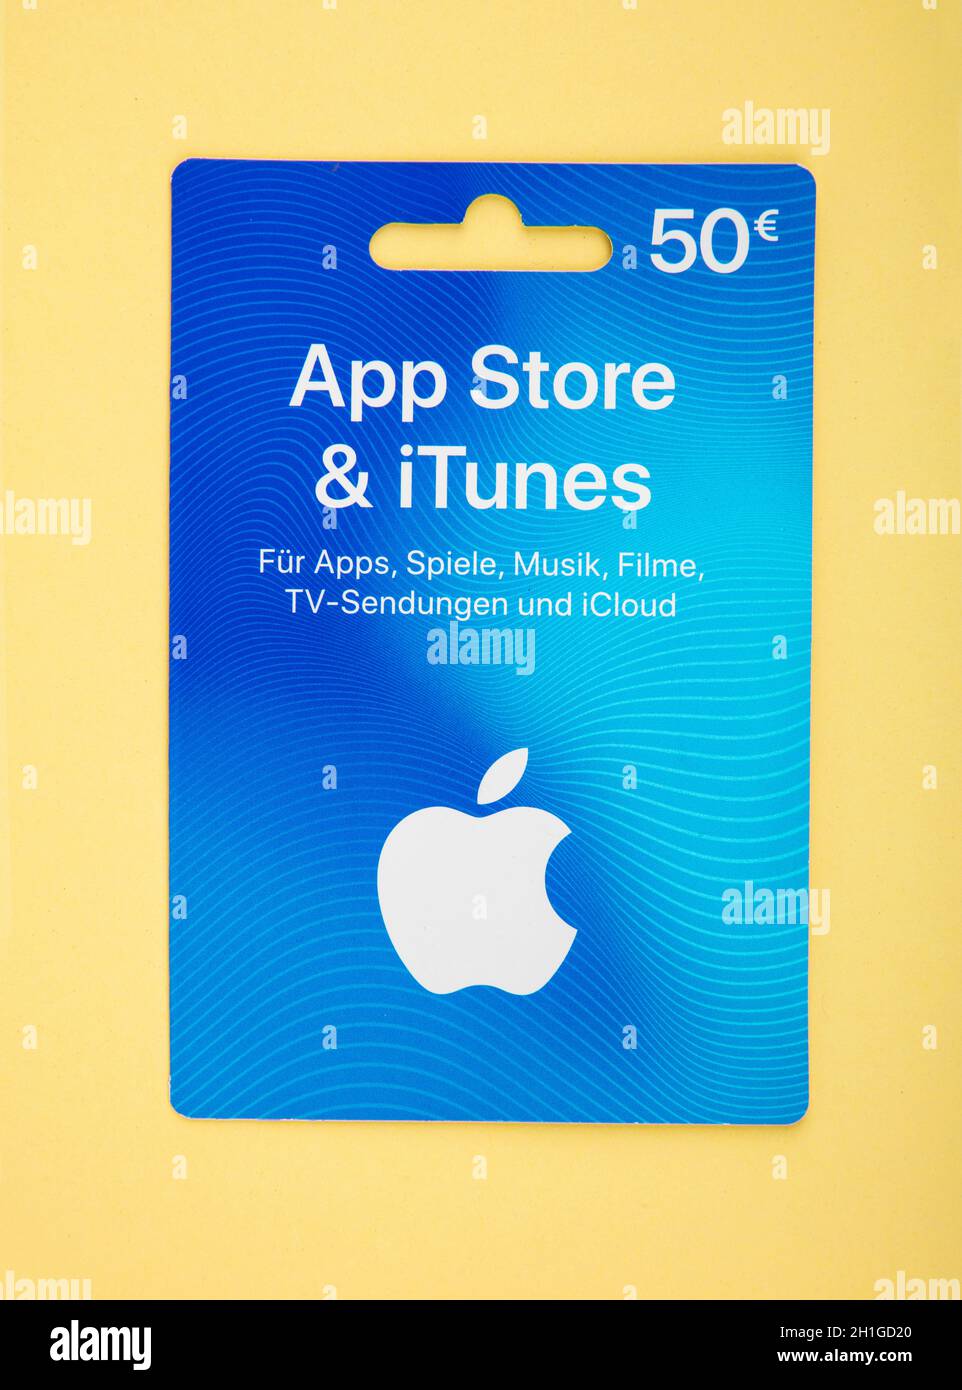 Apple gift card in a hand – Stock Editorial Photo © dennizn #254479252